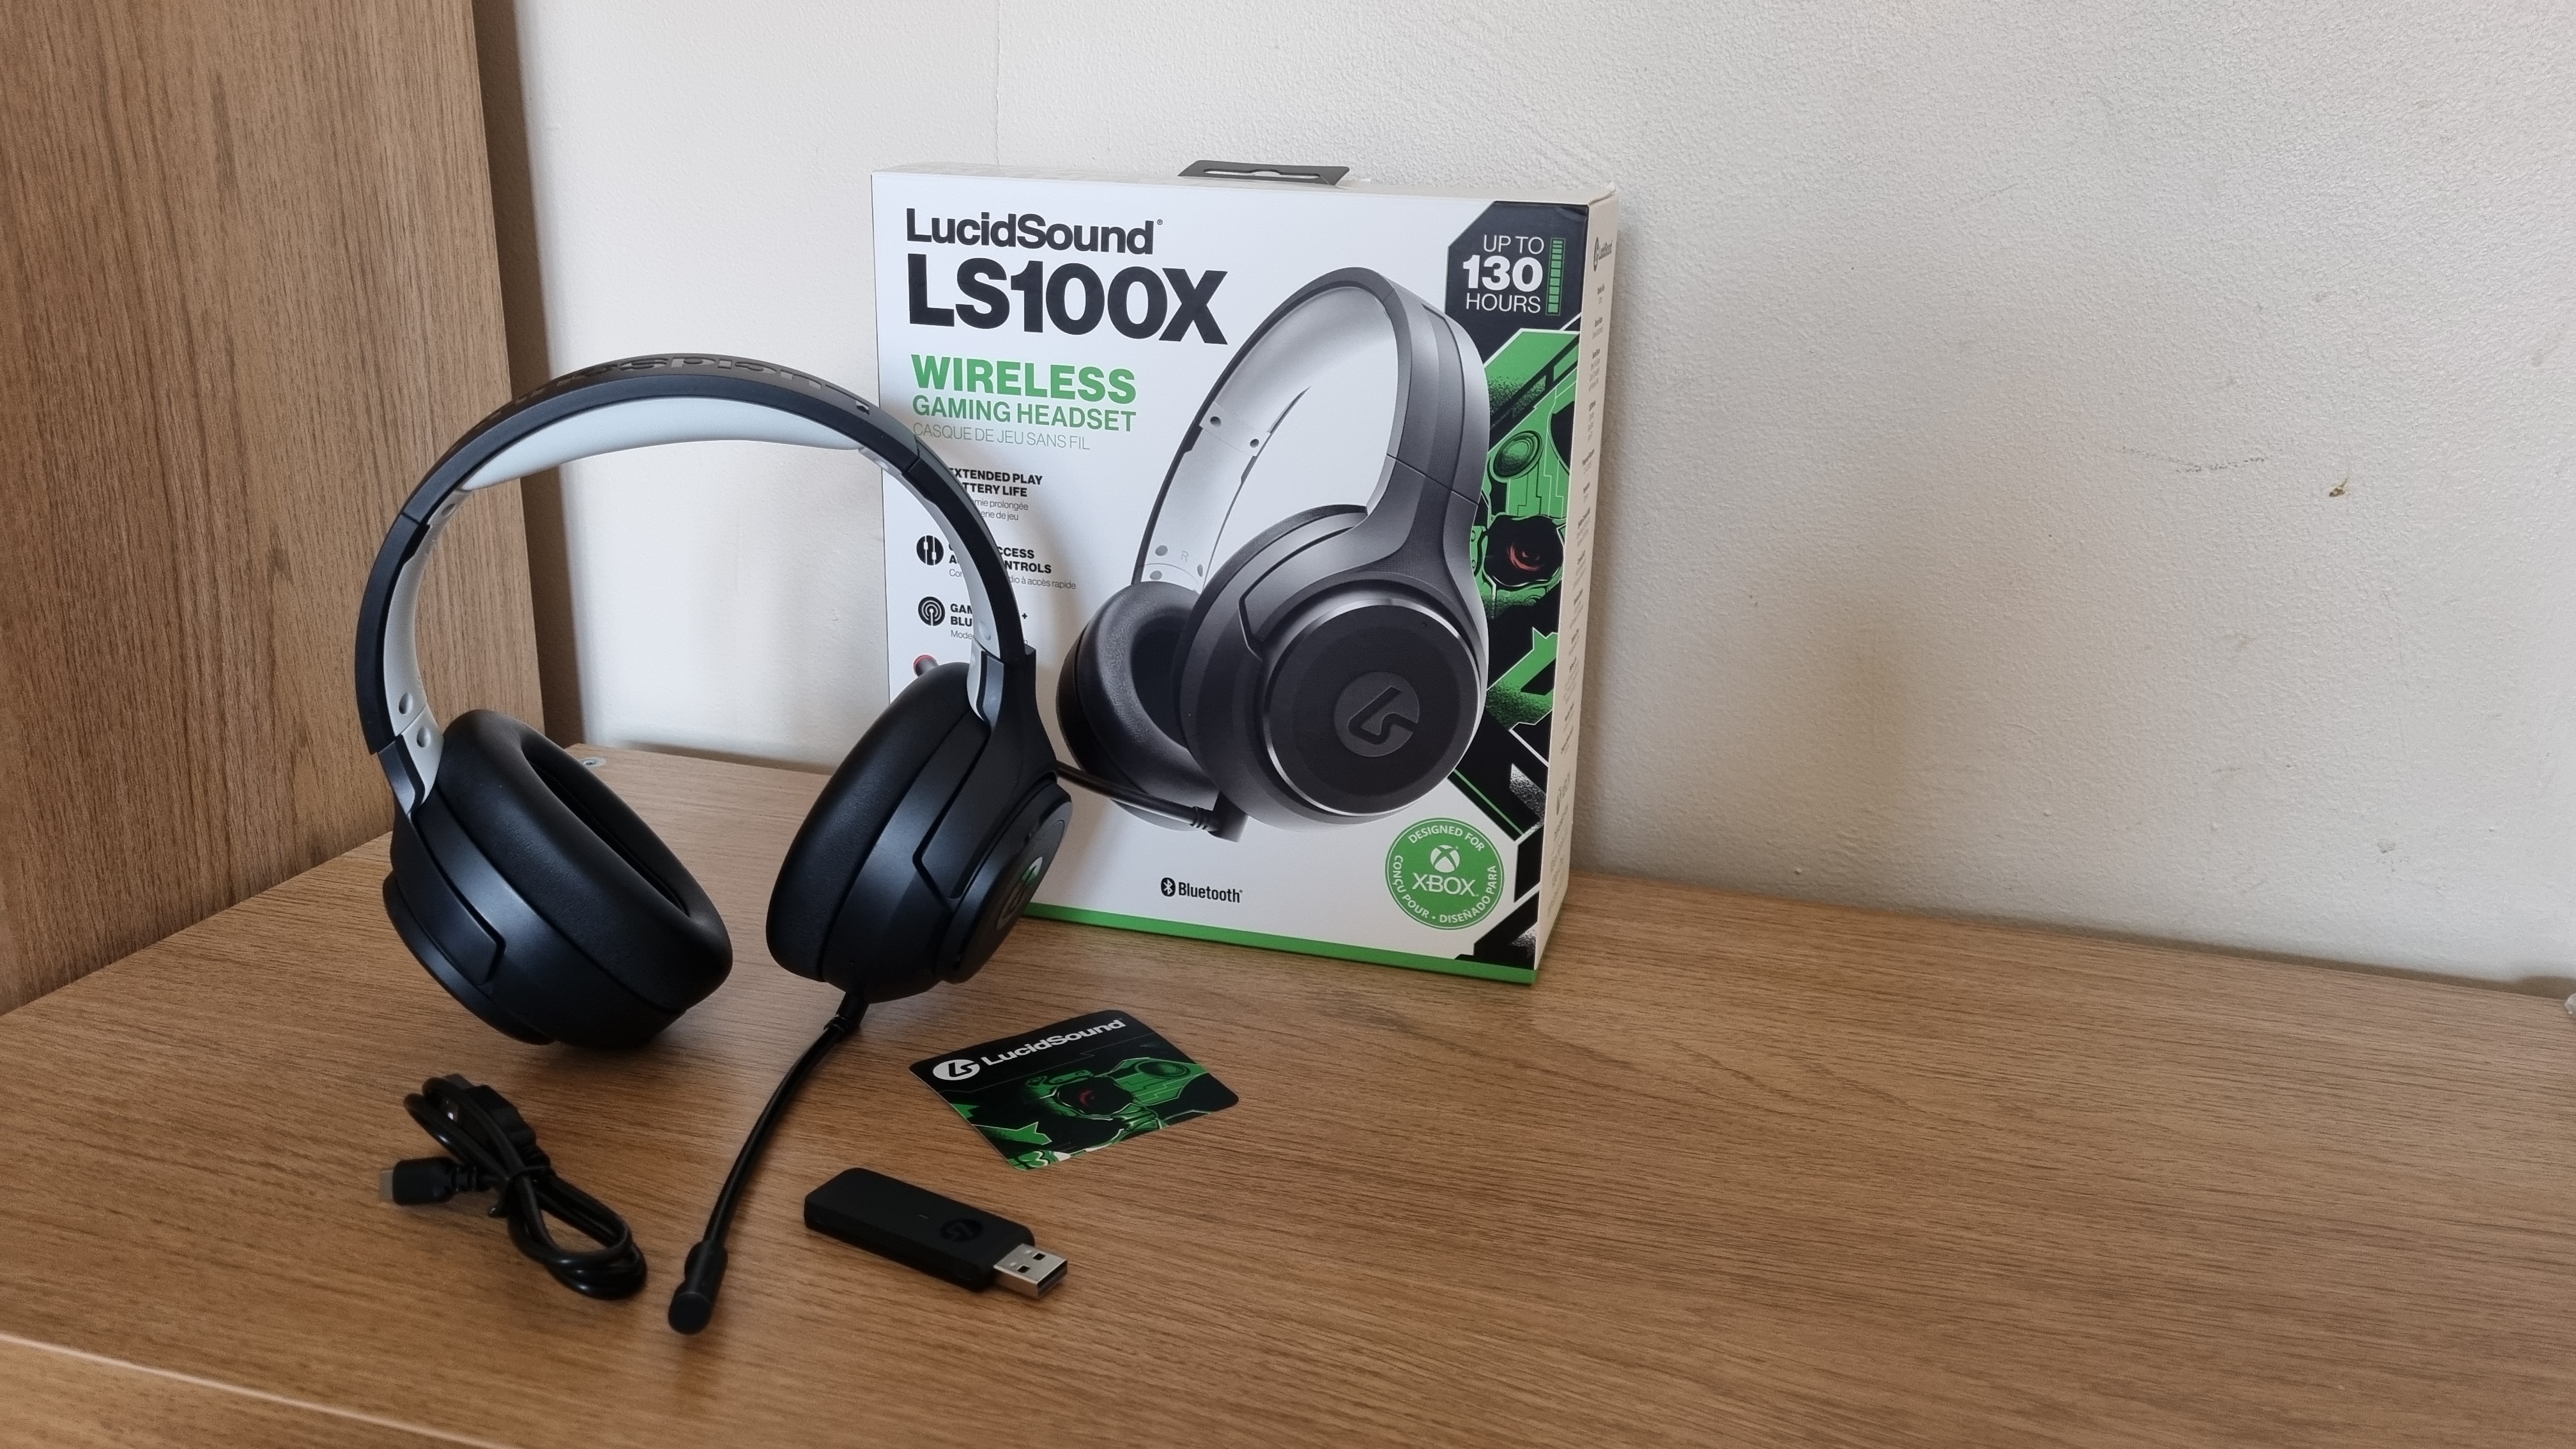 LucidSound LS100x with USB dongle and charging cable